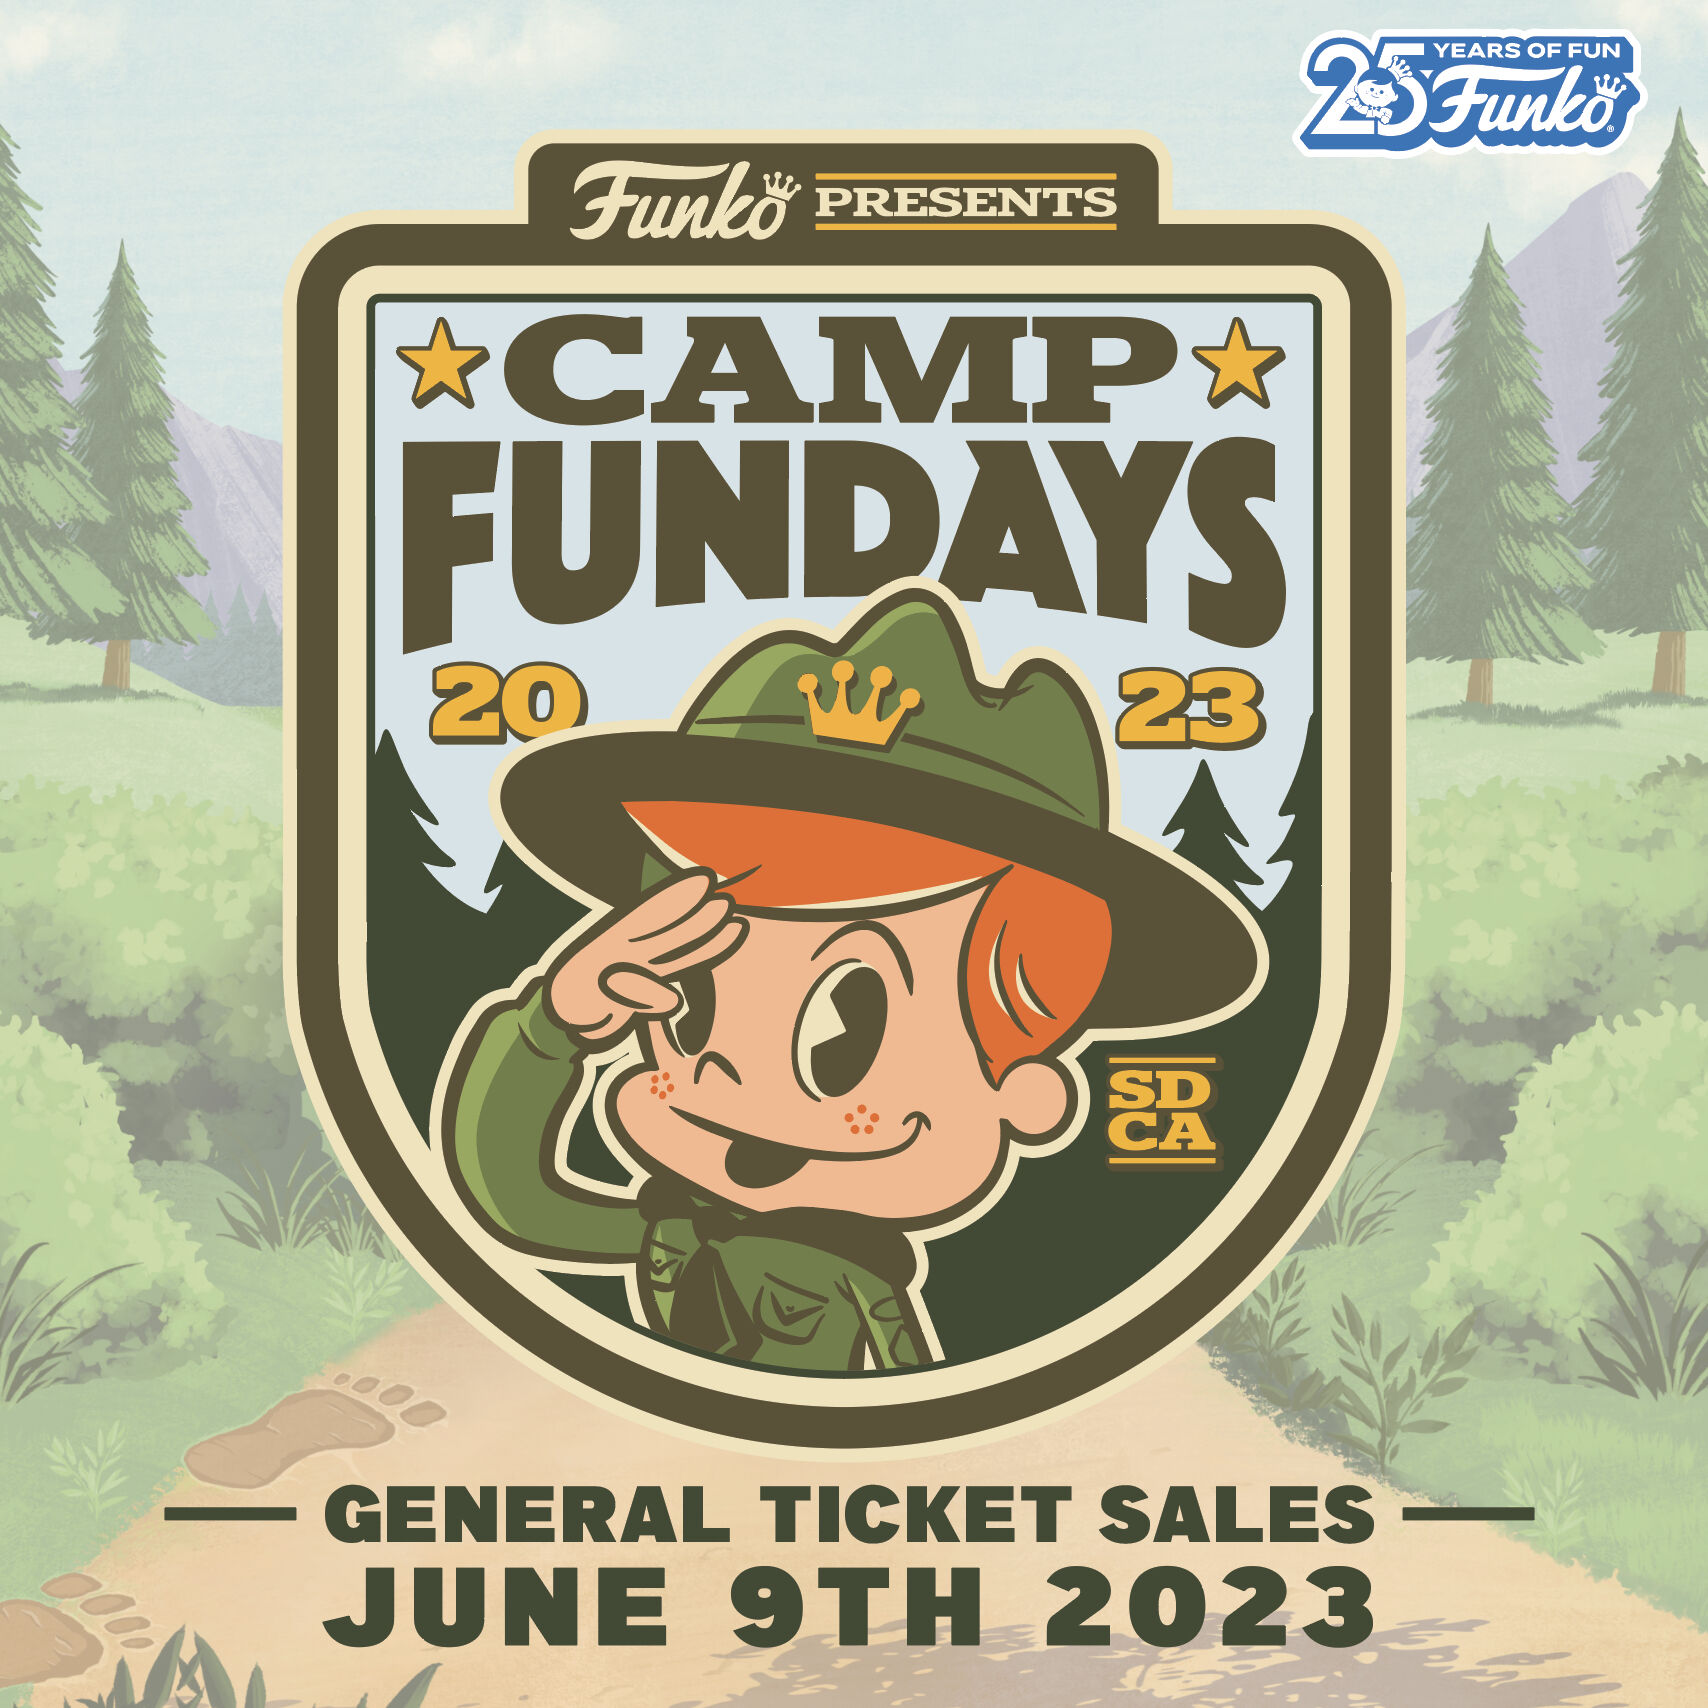 Camp Fundays 2023 Tickets Available June 9th